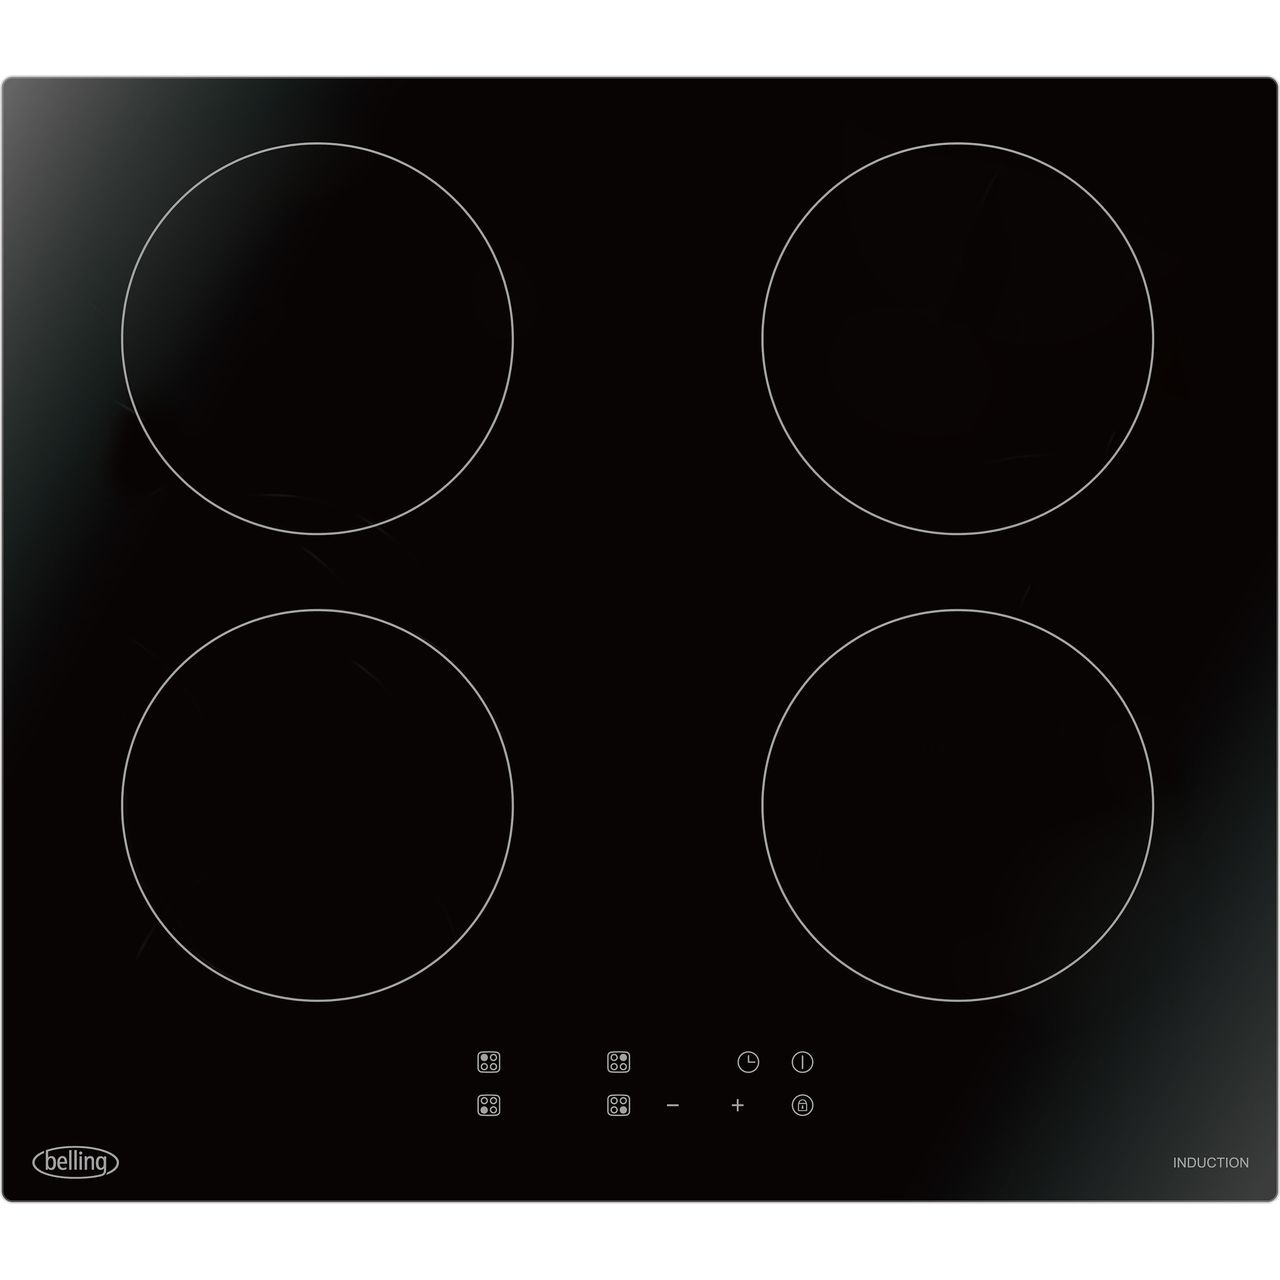 Belling IHT602 59cm Induction Hob Review